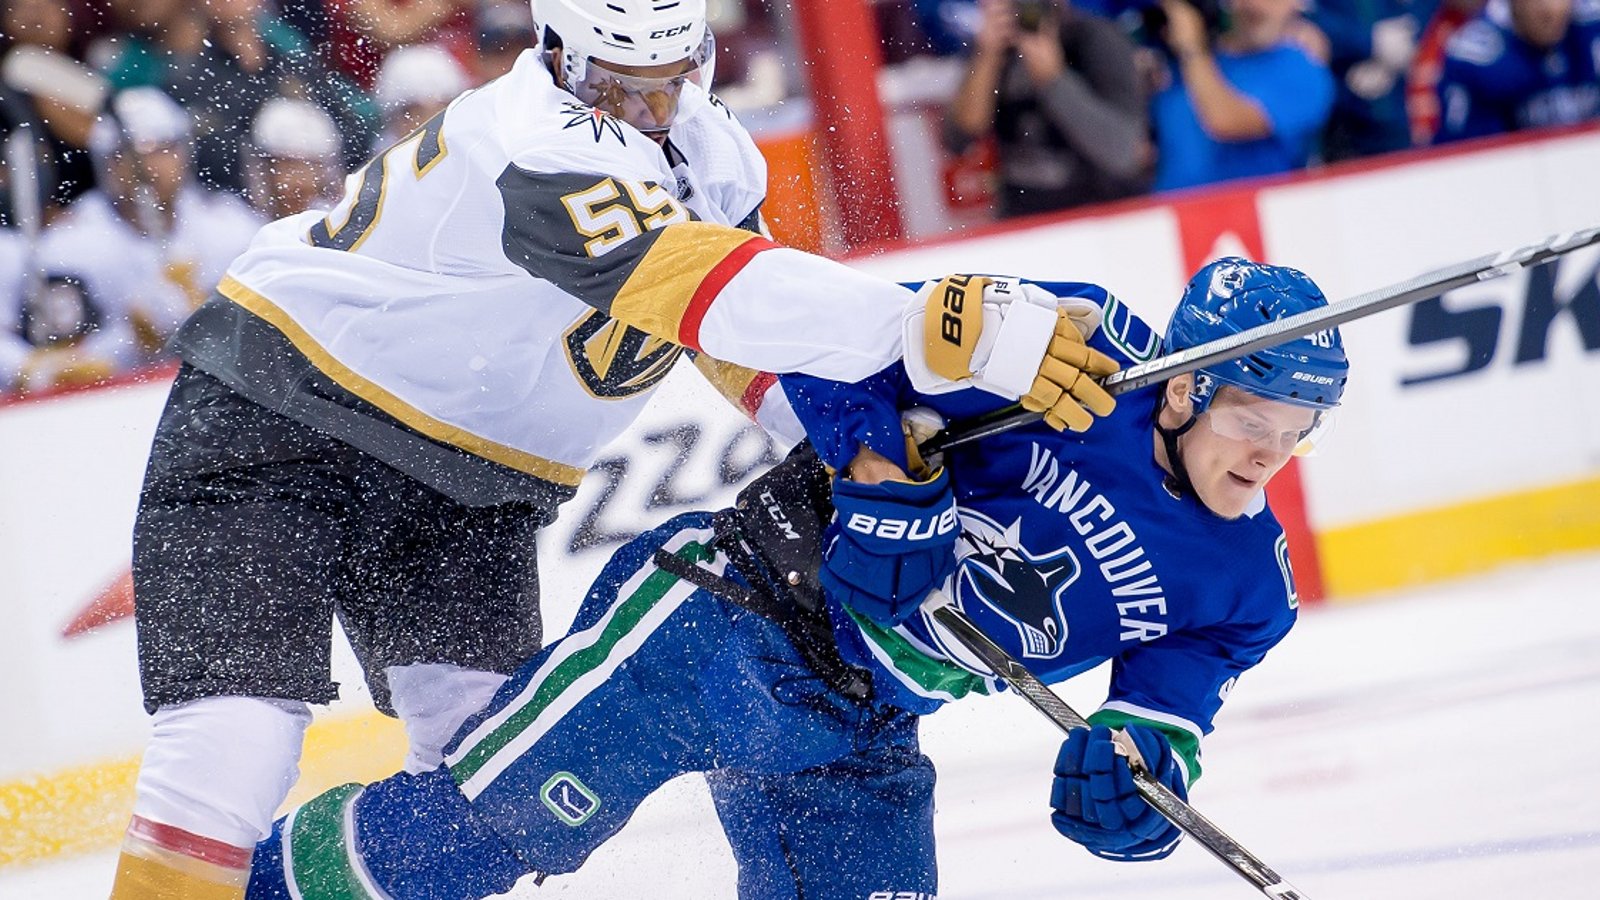 Canucks cut 7 players from camp, including 1st round pick Olli Juolevi.